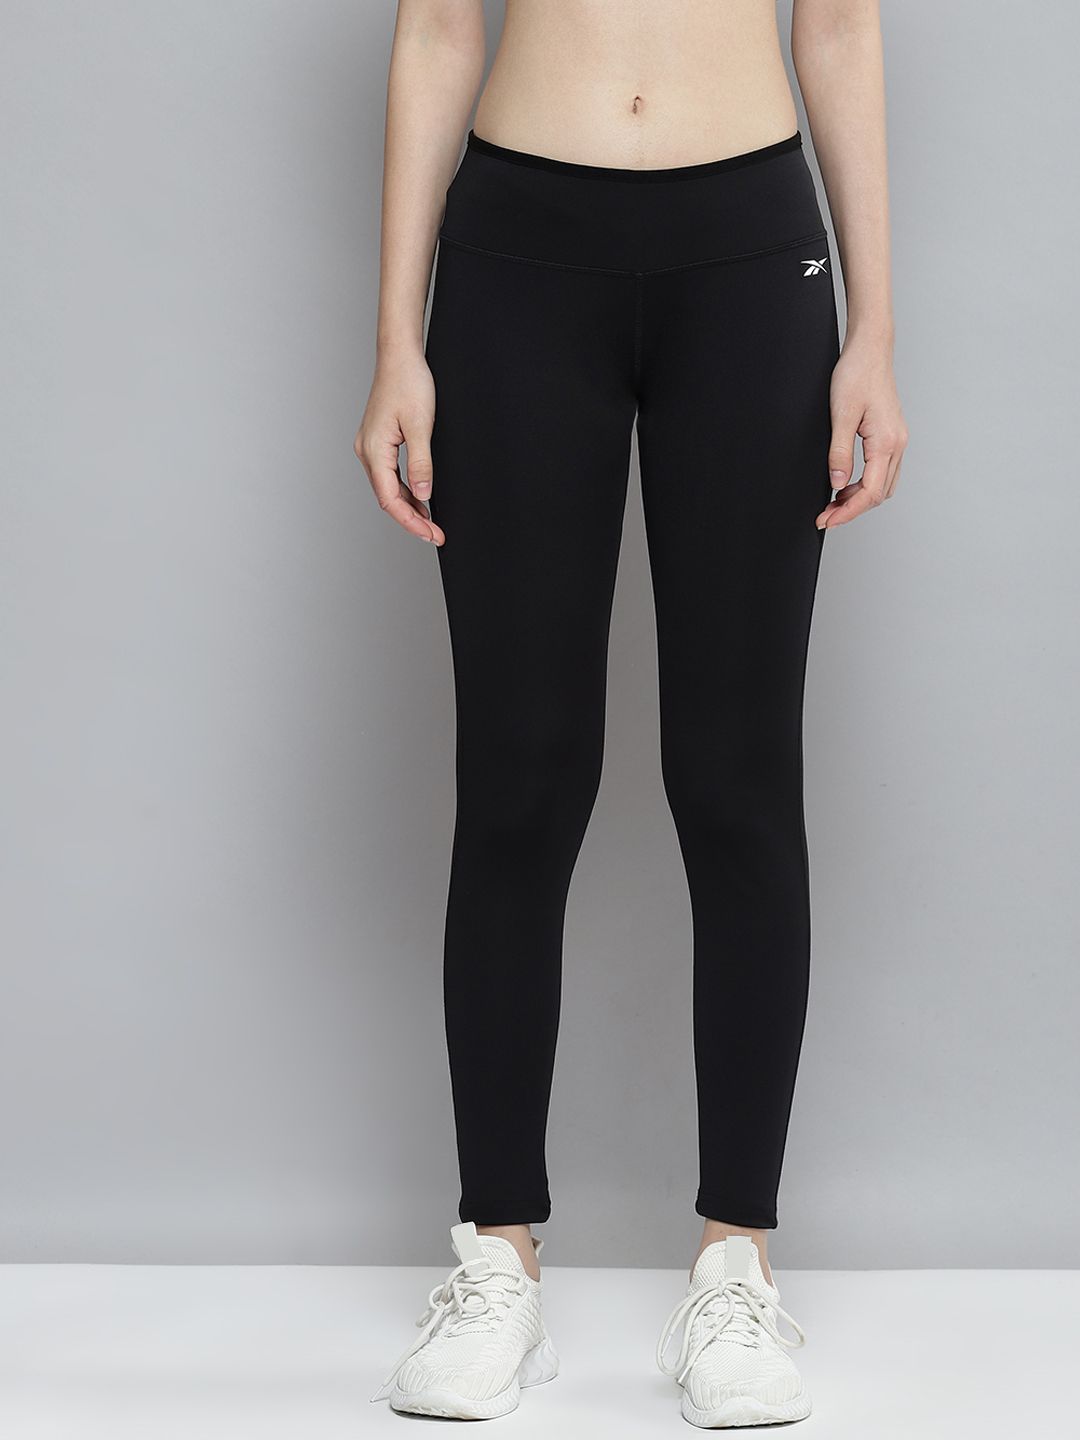 Reebok Women Black FND Solid Training Tights Price in India